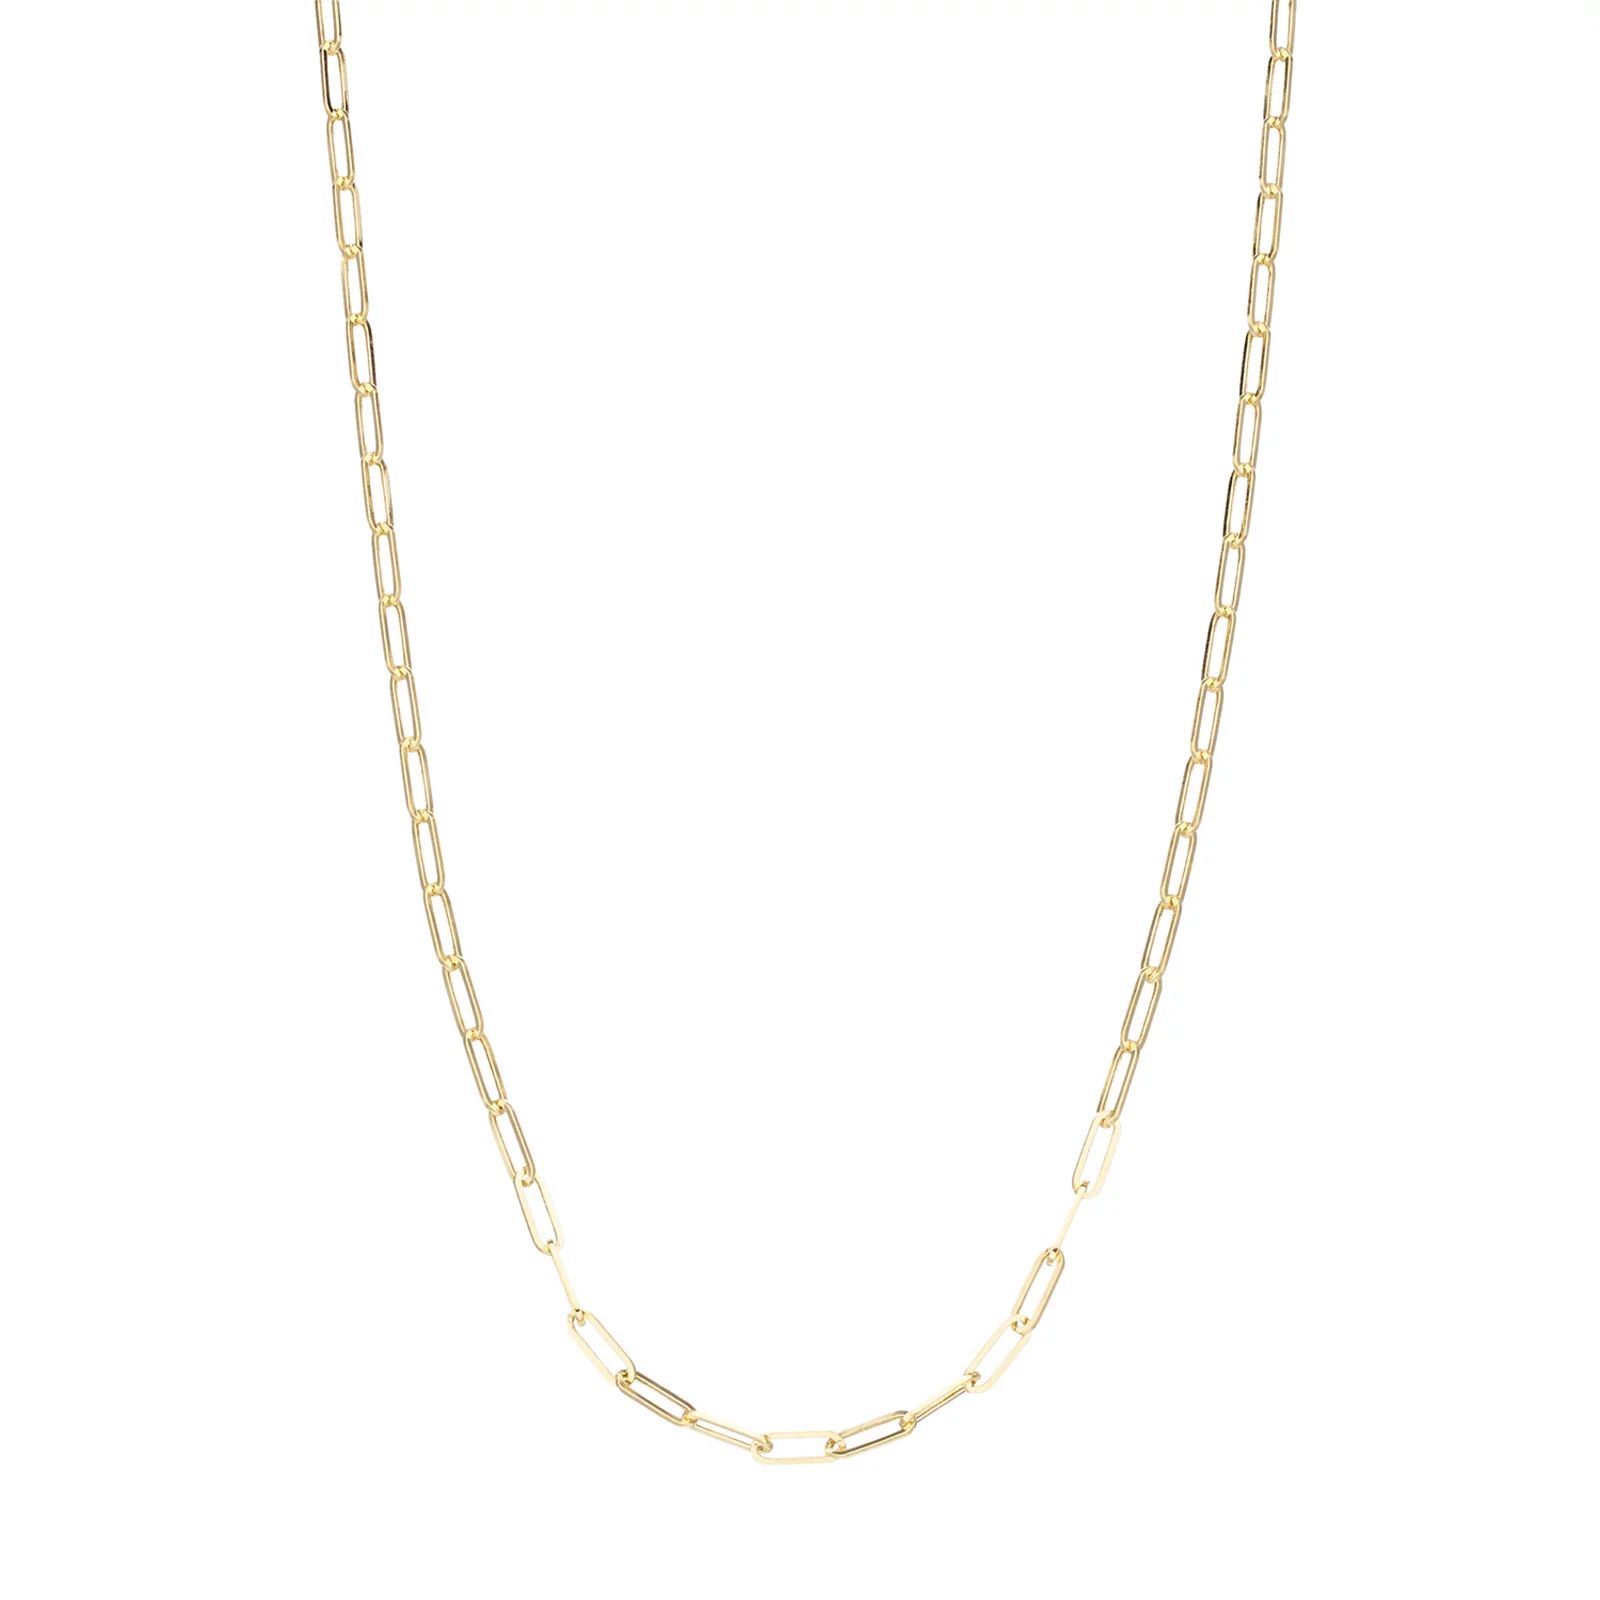 14k Gold Paperclip Necklace, Women's, Size: 18"", Yellow | Kohl's